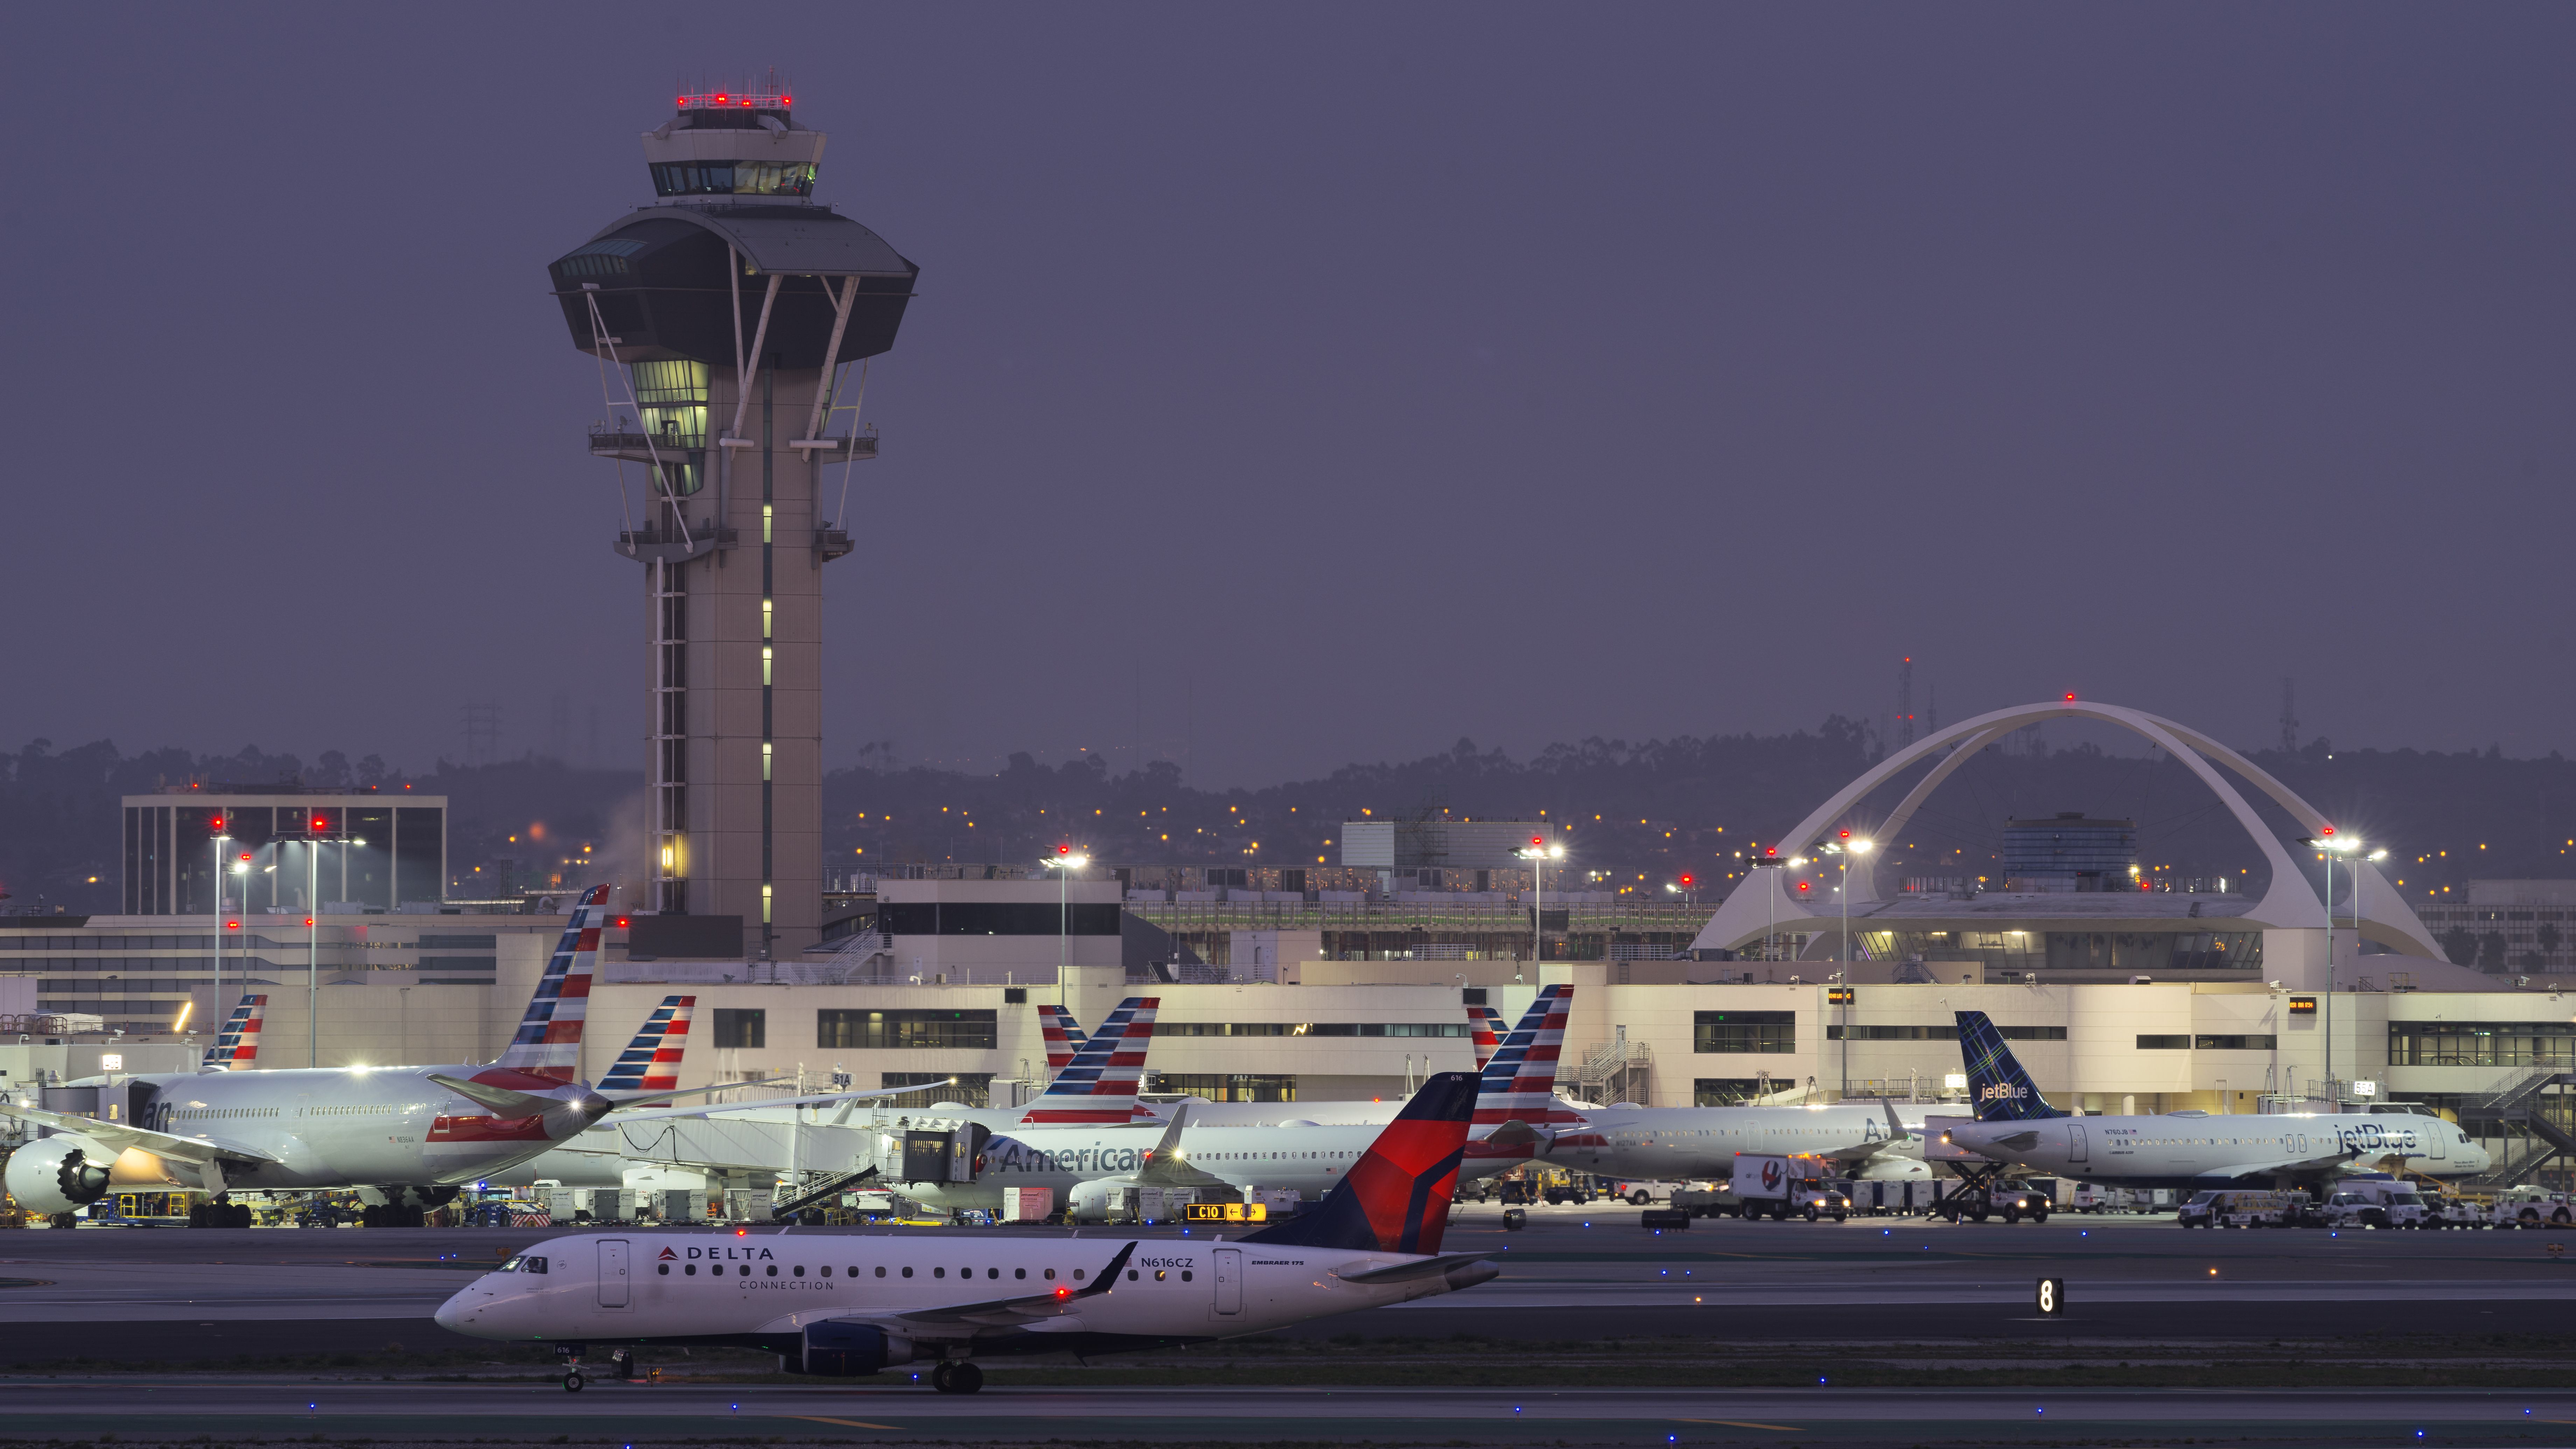 A Delta Connection Embraer 175 taxiing just after landing at LAX.